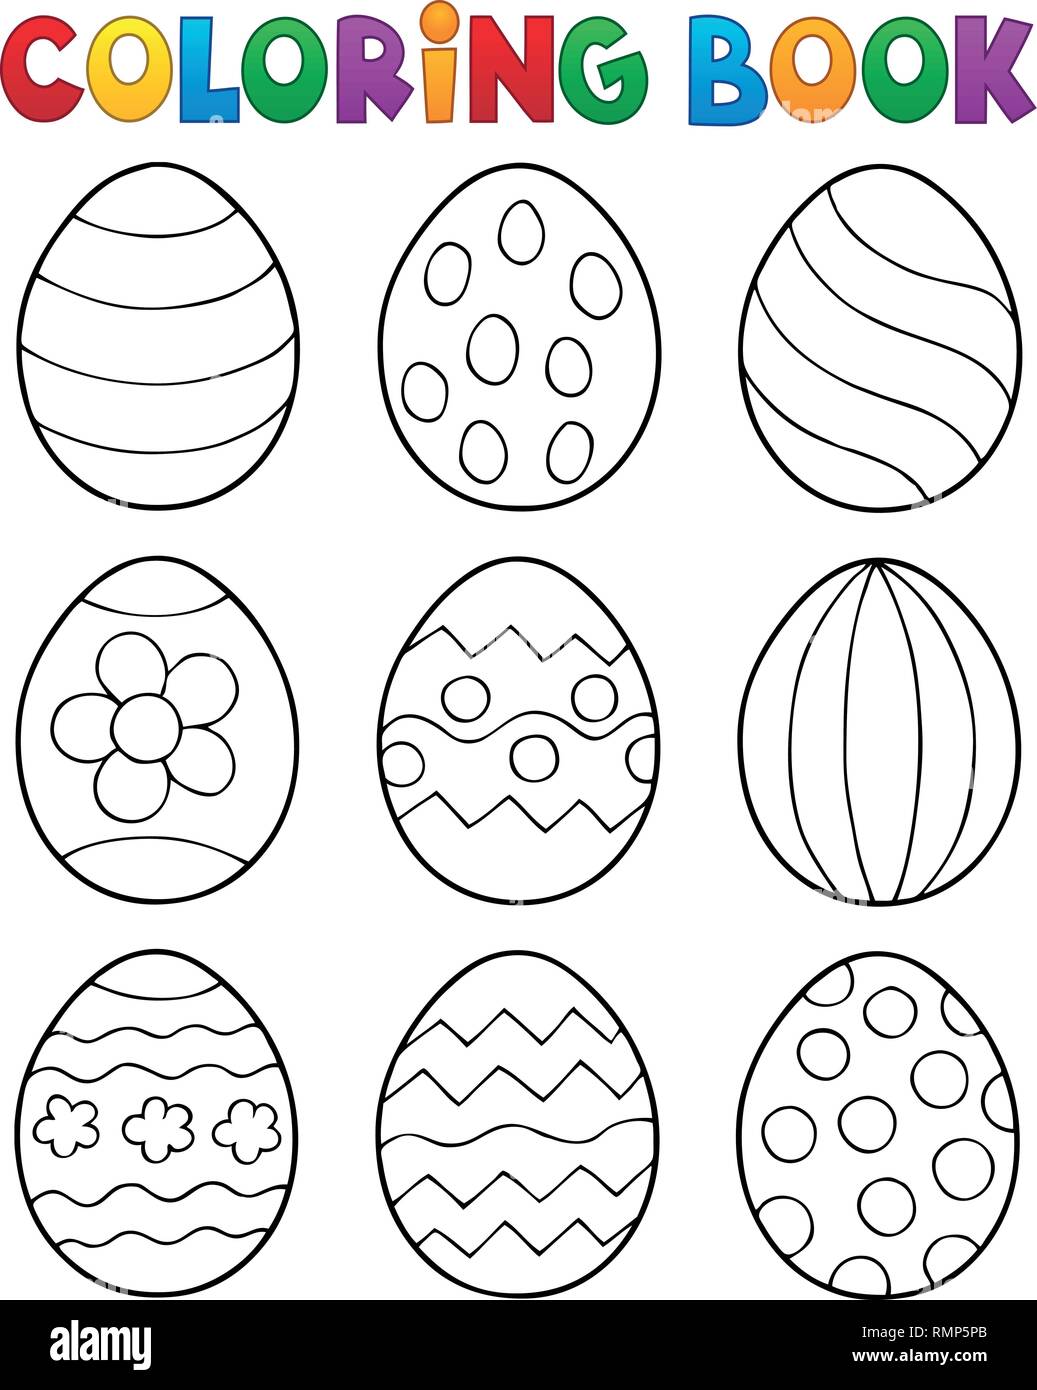 Download Coloring Book Easter Eggs Theme 2 Eps10 Vector Illustration Stock Vector Image Art Alamy